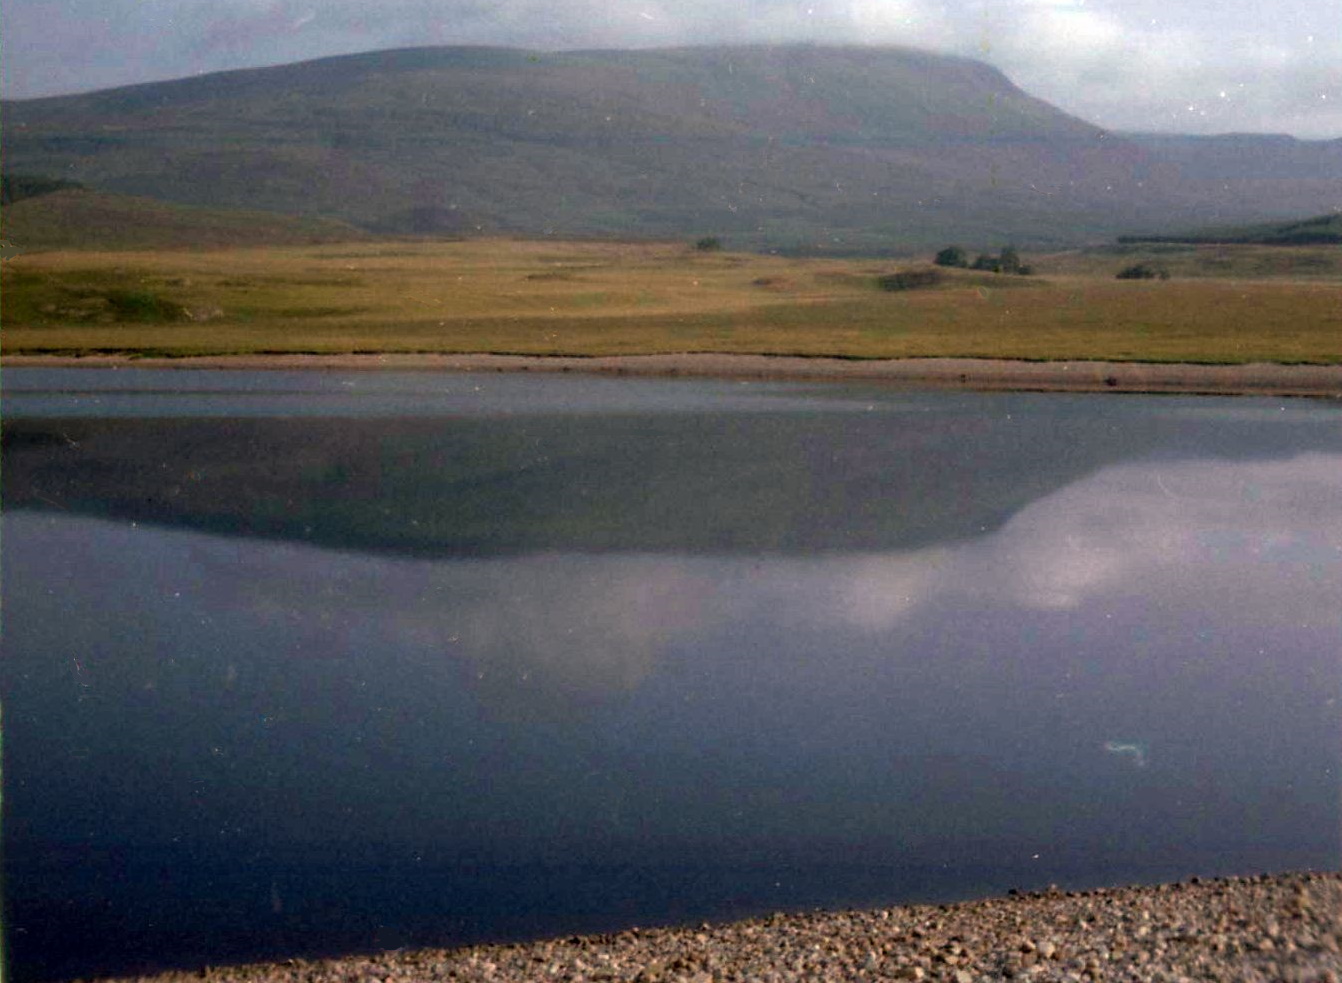 Geal Charn in the Monadh Liath Mountains